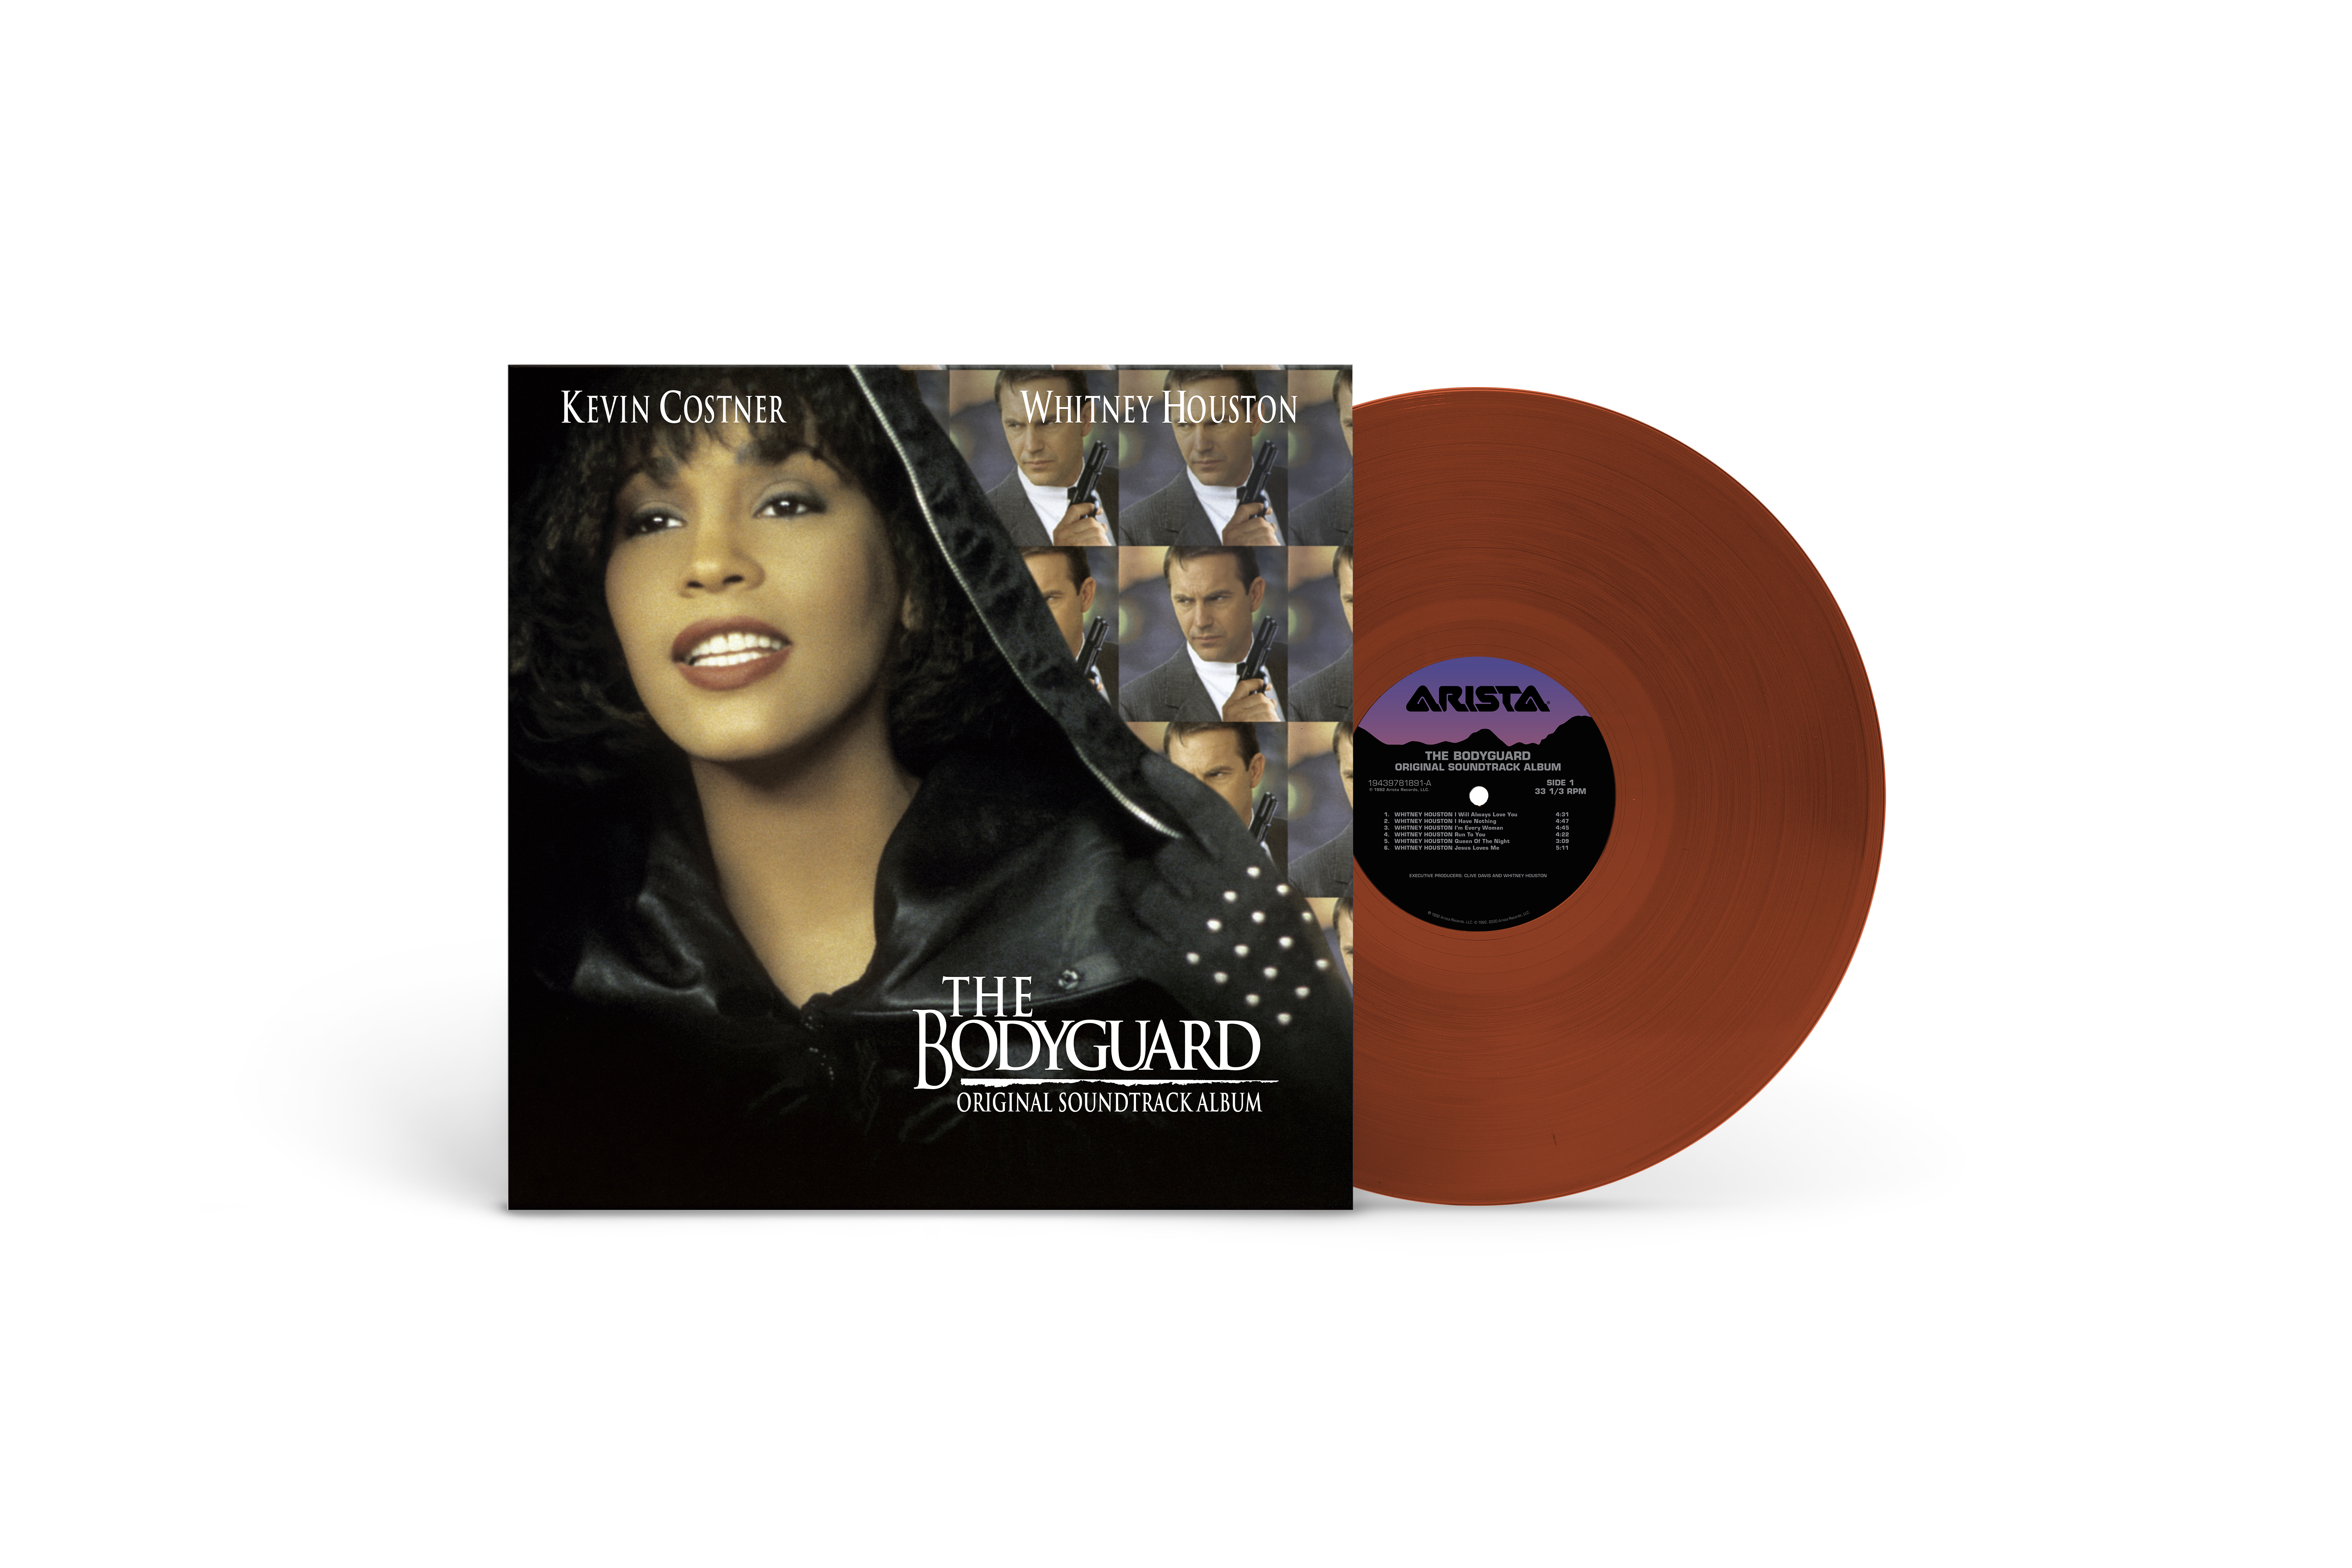 CELEBRATE THE 30TH ANNIVERSARY OF ‘THE BODYGUARD’ WITH A NEW VINYL RELEASE OF THE ‘ORIGINAL SOUNDTRACK ALBUM’